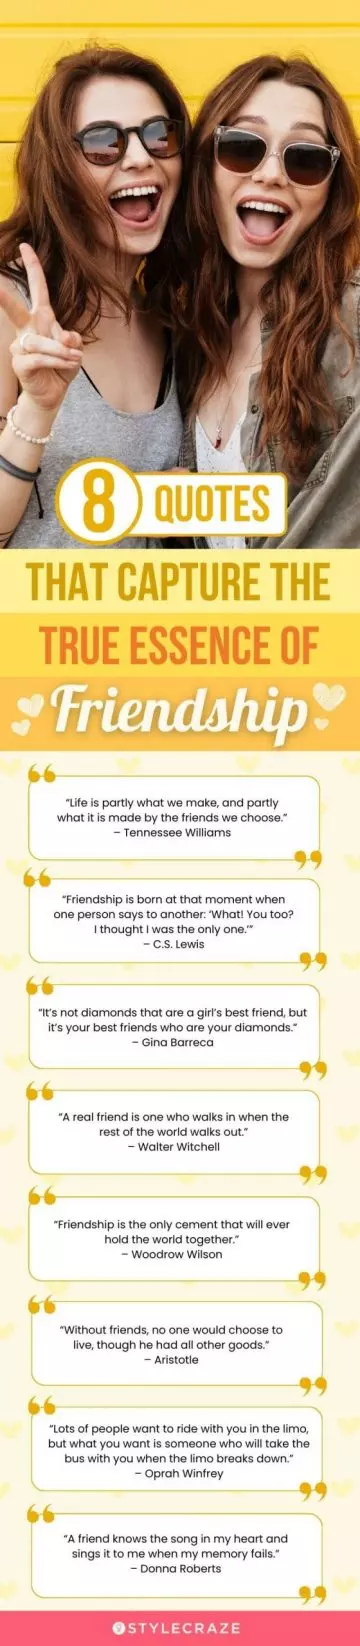 8 quotes that capture the true essence of friendship (infographic)